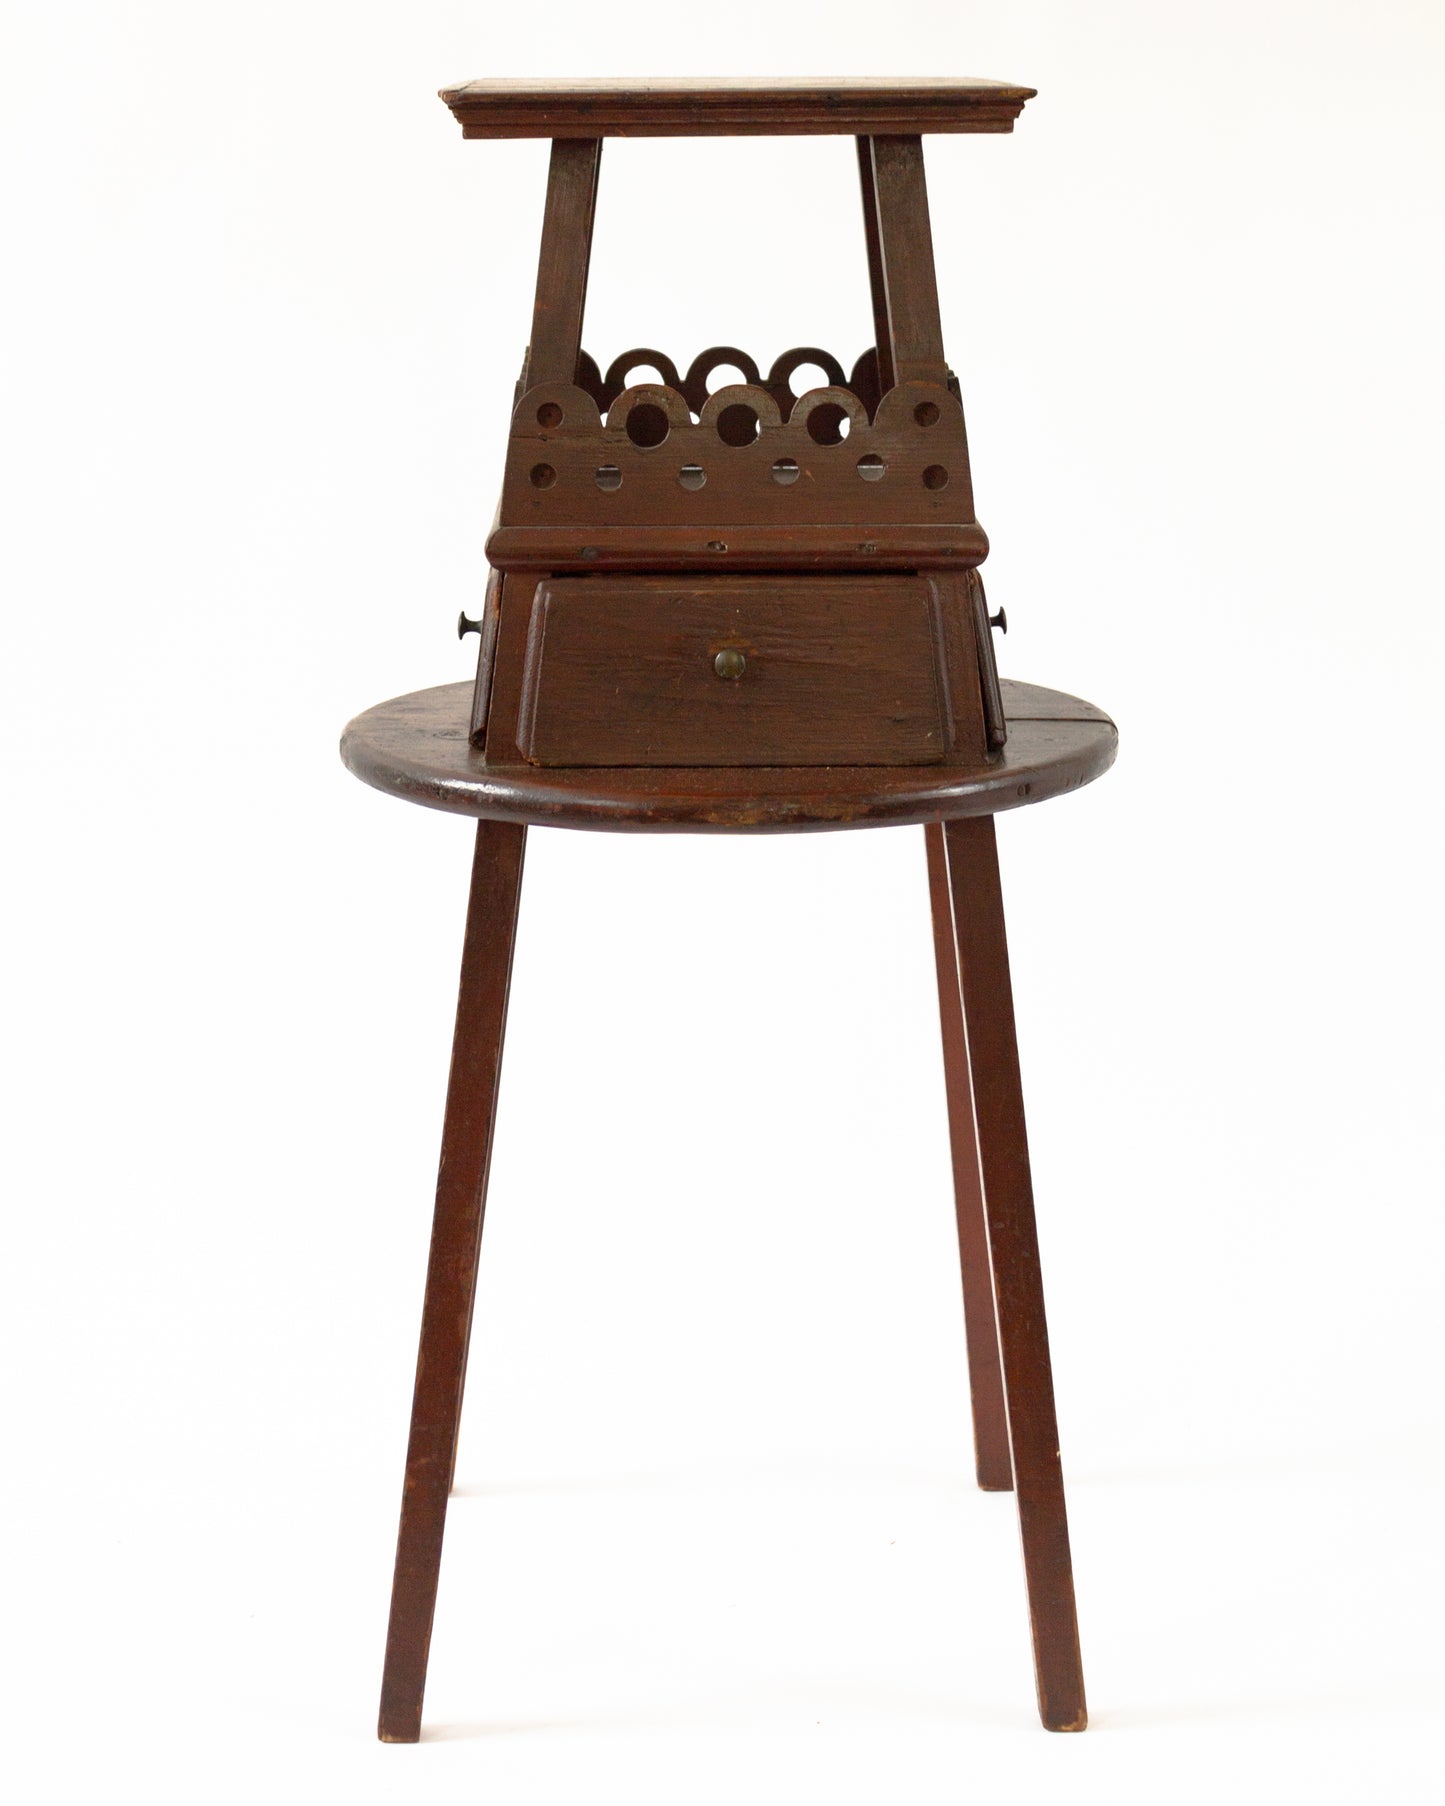 Rare or Possibly Unique Early Sewing Stand